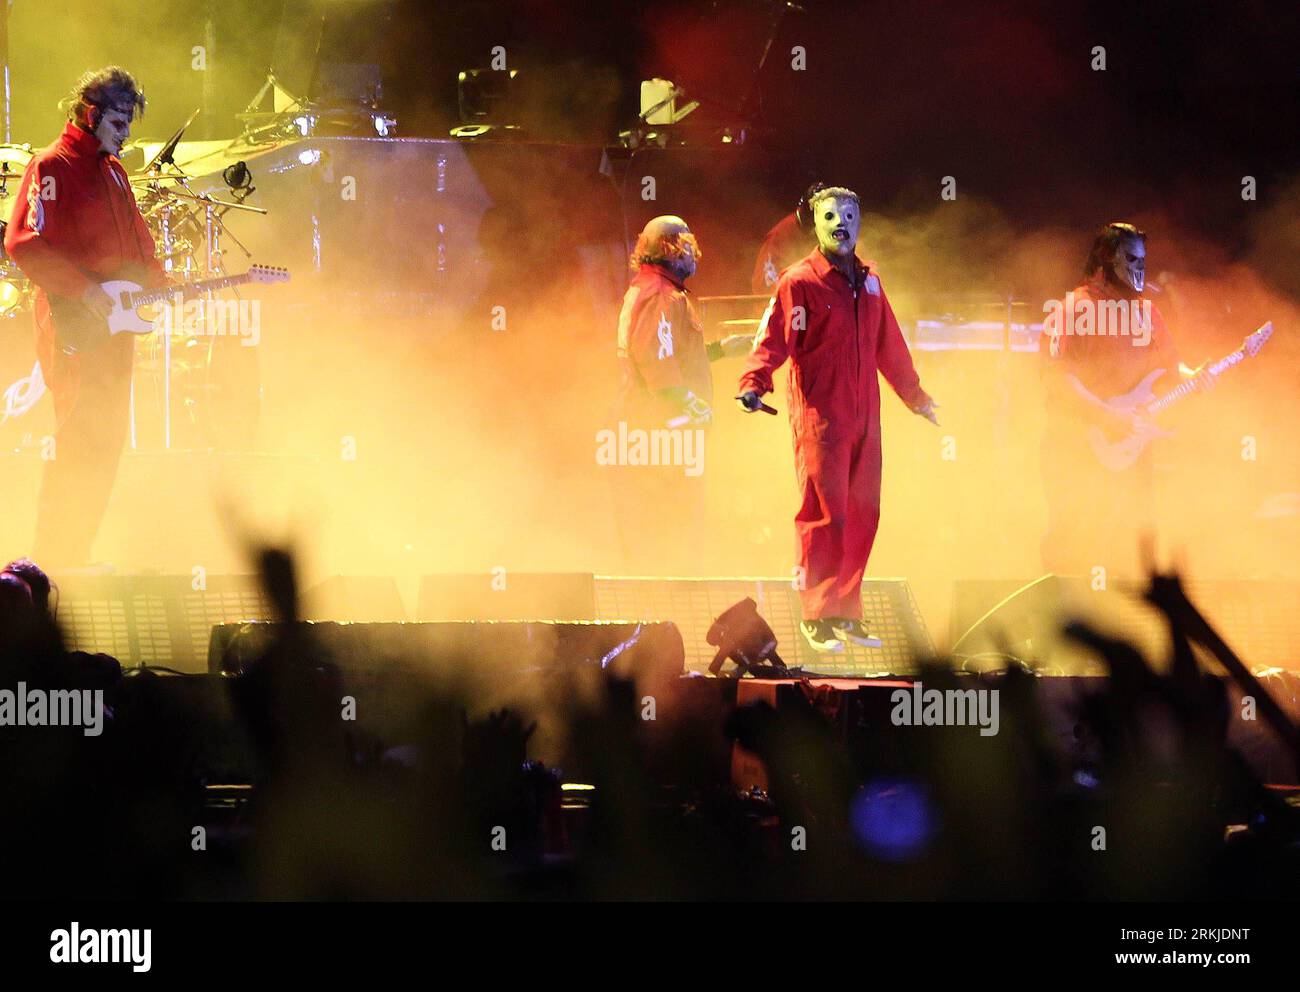 Bildnummer: 56116049  Datum: 26.09.2011  Copyright: imago/Xinhua (110926) -- RIO DE JANEIRO, Sept. 26, 2011 (Xinhua) -- Members of Slipknot, an American heavy metal band, perform during Rock in Rio, held in southeast Brazil s Rio de Janeiro, Sept. 26, 2011. Initiated in 1985, Rock in Rio is among the world s largest music festivals. The 10-day event lasts to Oct. 2. (Xinhua/Agencia Estado) (BRAZIL OUT) (lmm) BRAZIL-RIO DE JANEIRO-MUSIC FESTIVAL-ROCK IN RIO PUBLICATIONxNOTxINxCHN People Musik Entertainment Aktion x0x xtm 2011 quer      56116049 Date 26 09 2011 Copyright Imago XINHUA  Rio de Jan Stock Photo